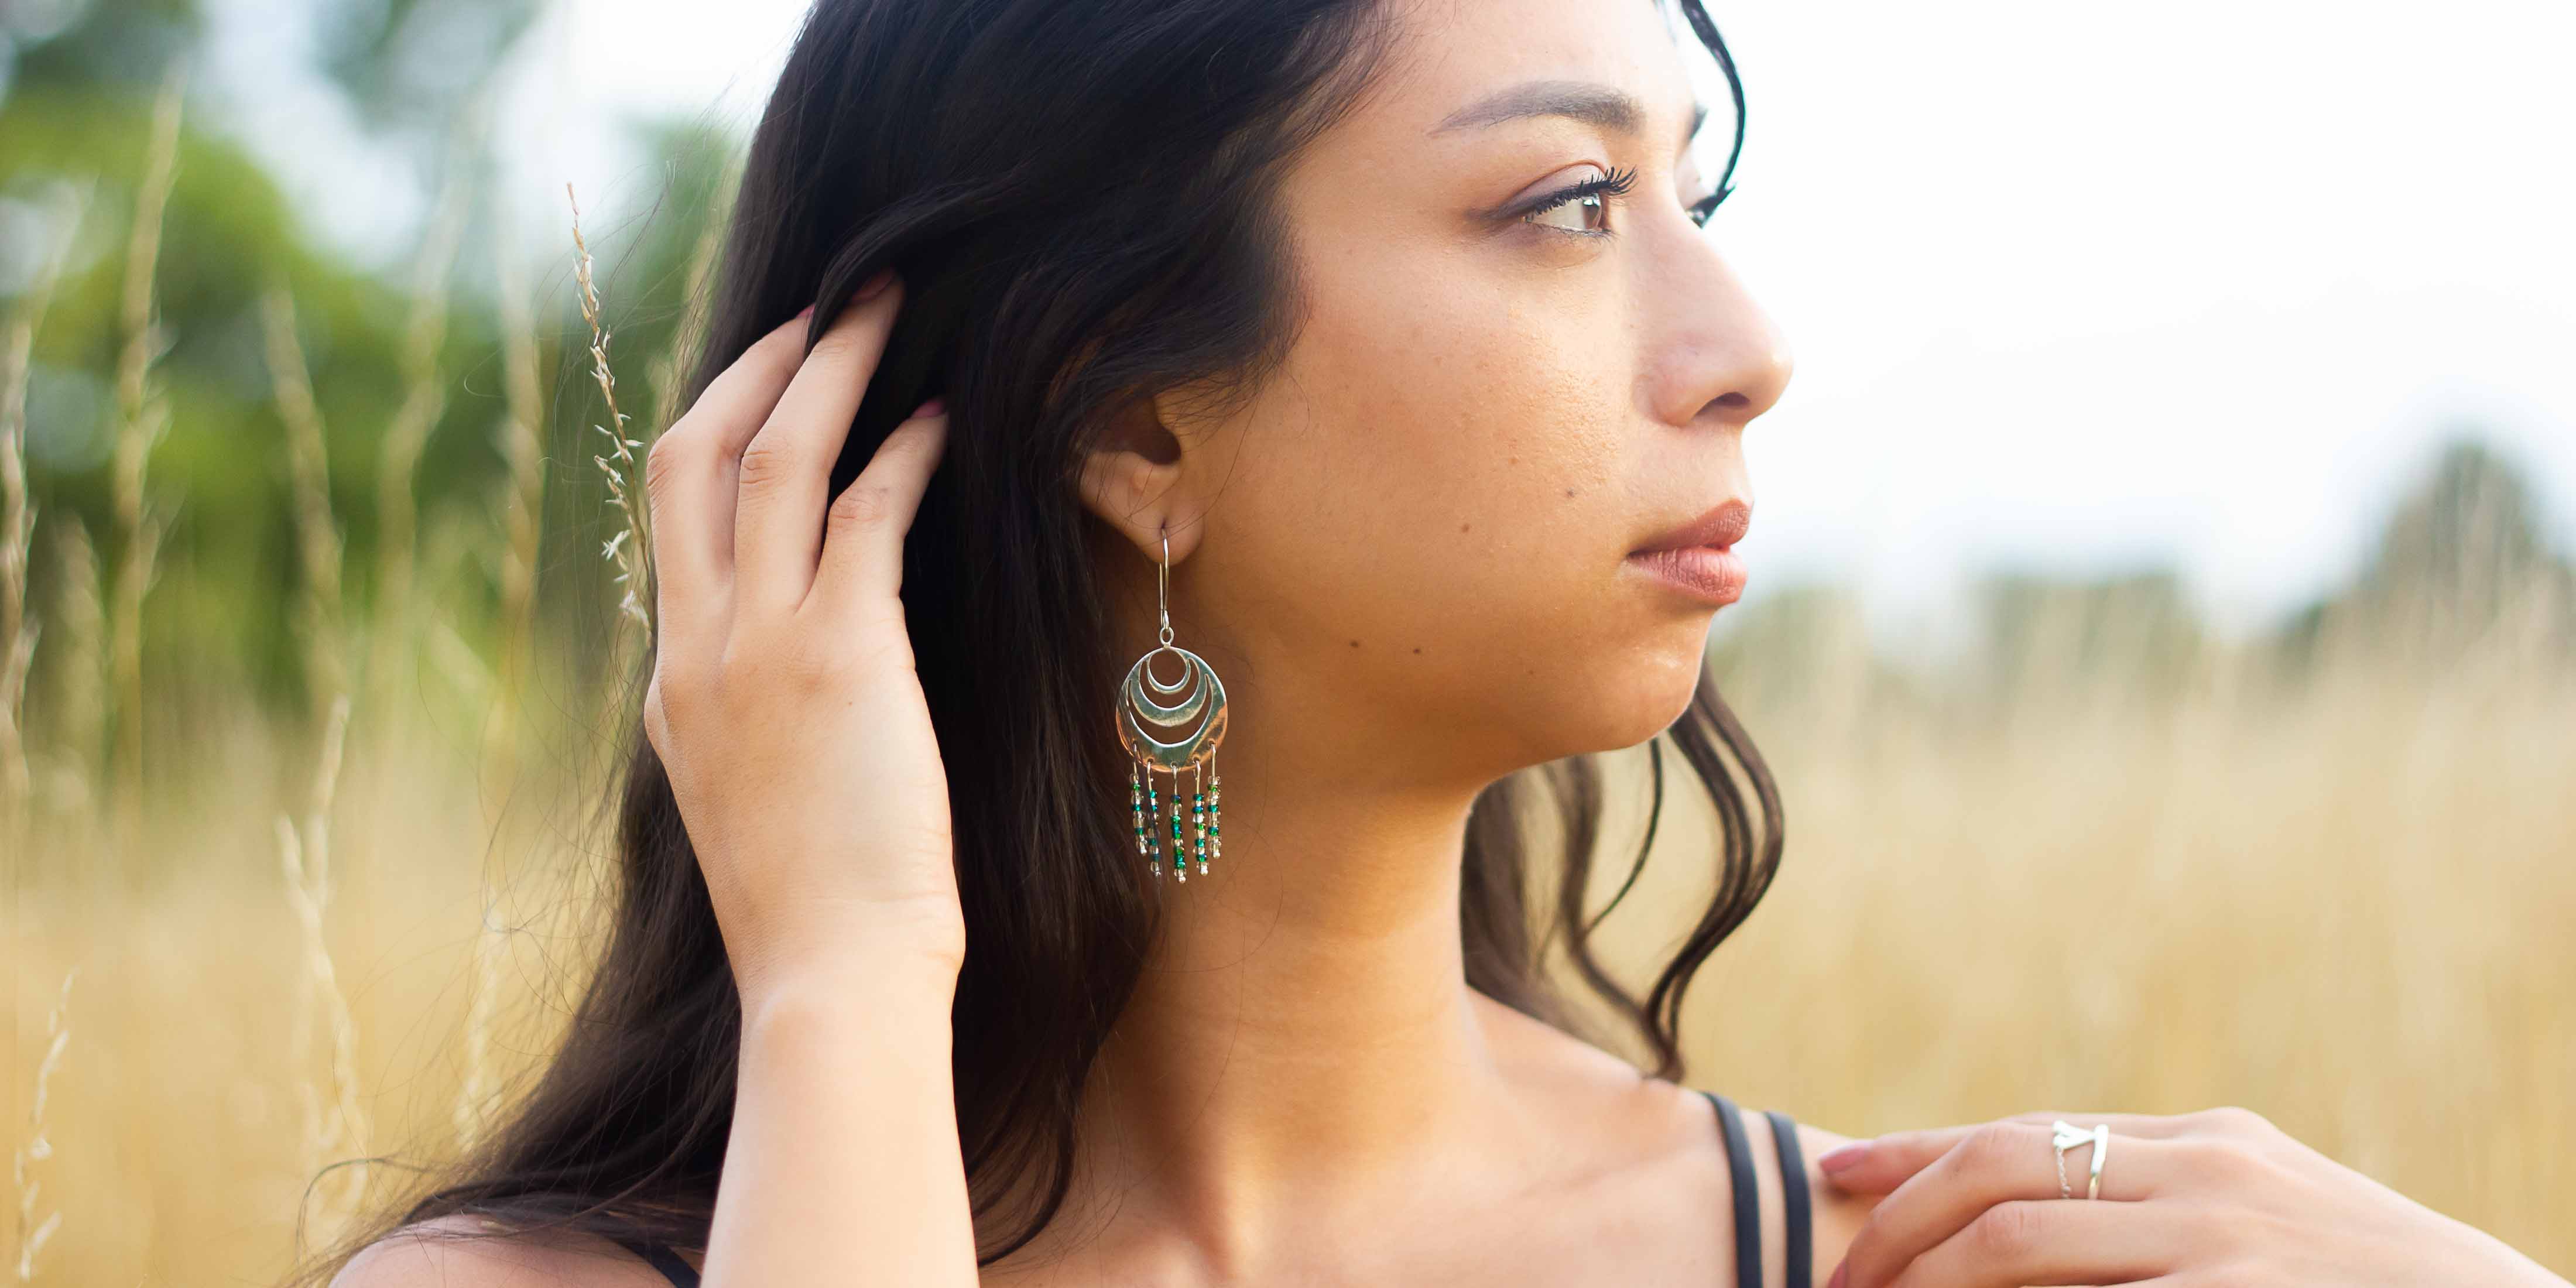 Woman wearing silver and copper earrings with beads, looks across field of golden grass